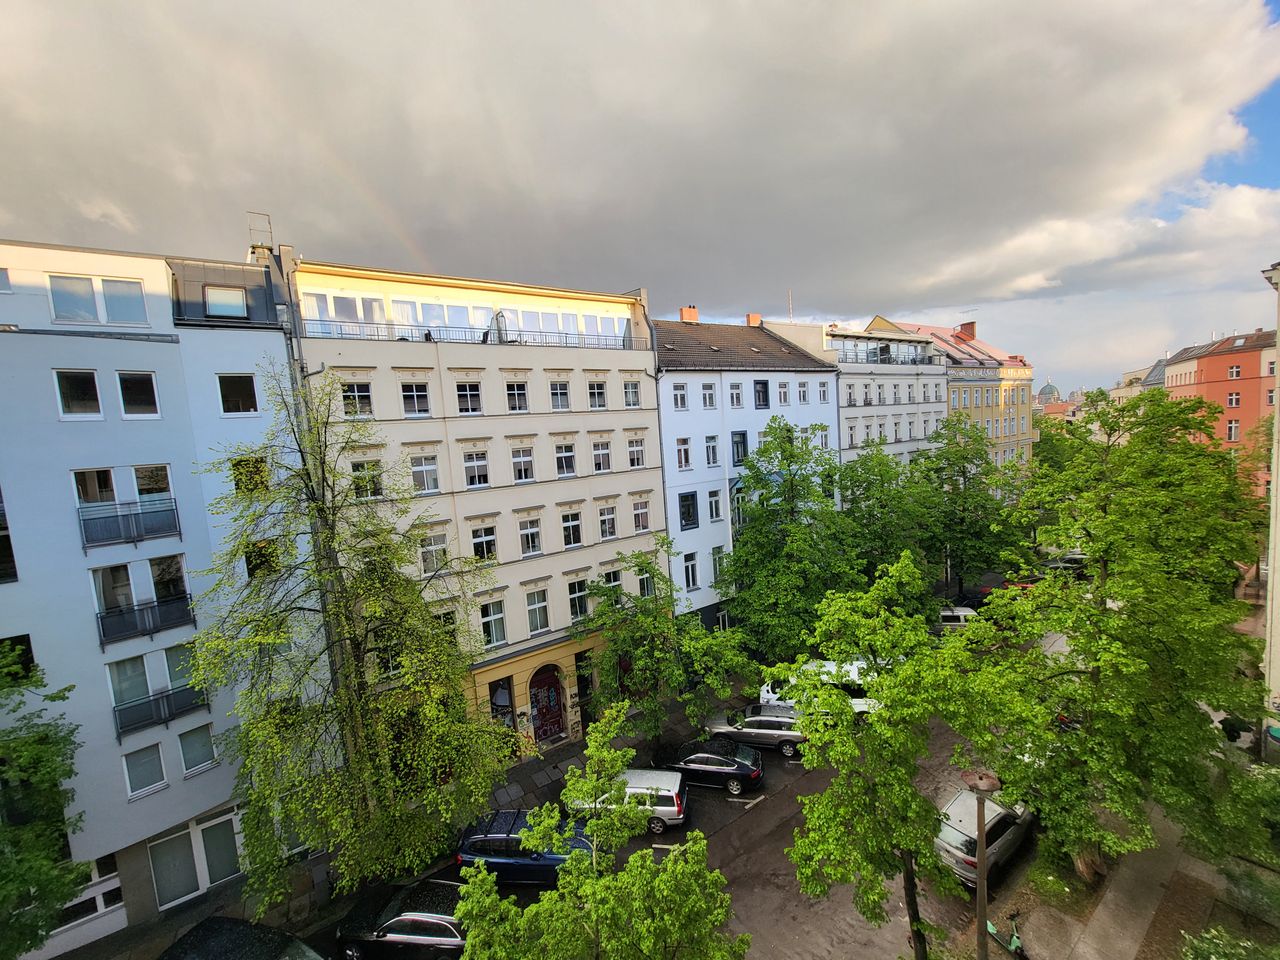 furnished, temporary max. 2 years: bright, cozy 3-room apartment in Berlin-Mitte/Prenzlauer Berg with balcony and large communal garden